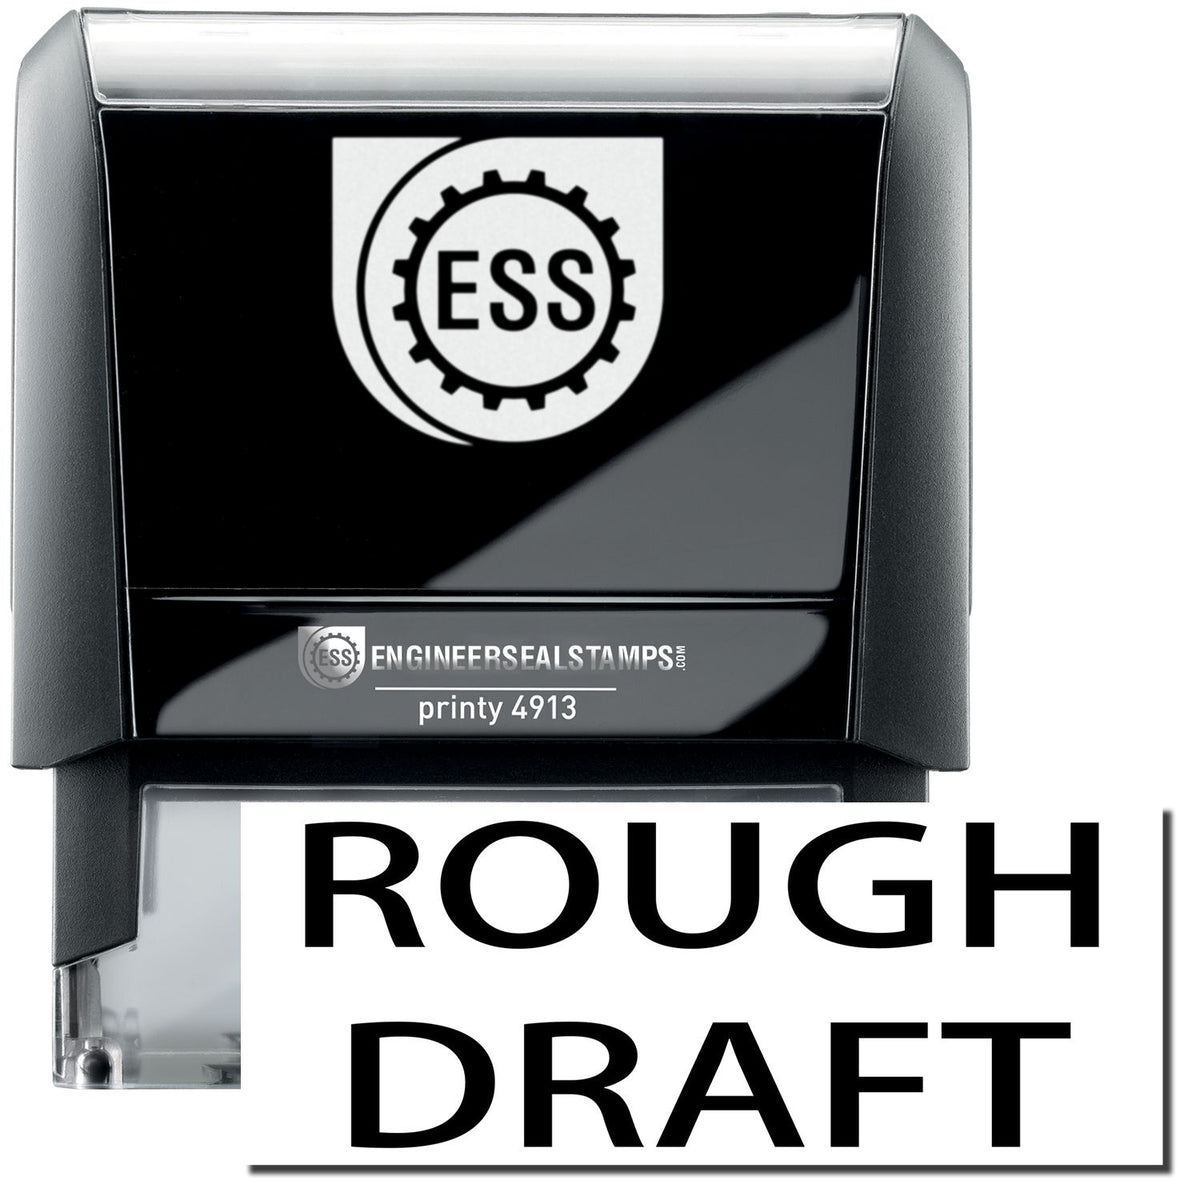 A self-inking stamp with a stamped image showing how the text &quot;ROUGH DRAFT&quot; in a large bold font is displayed by it.